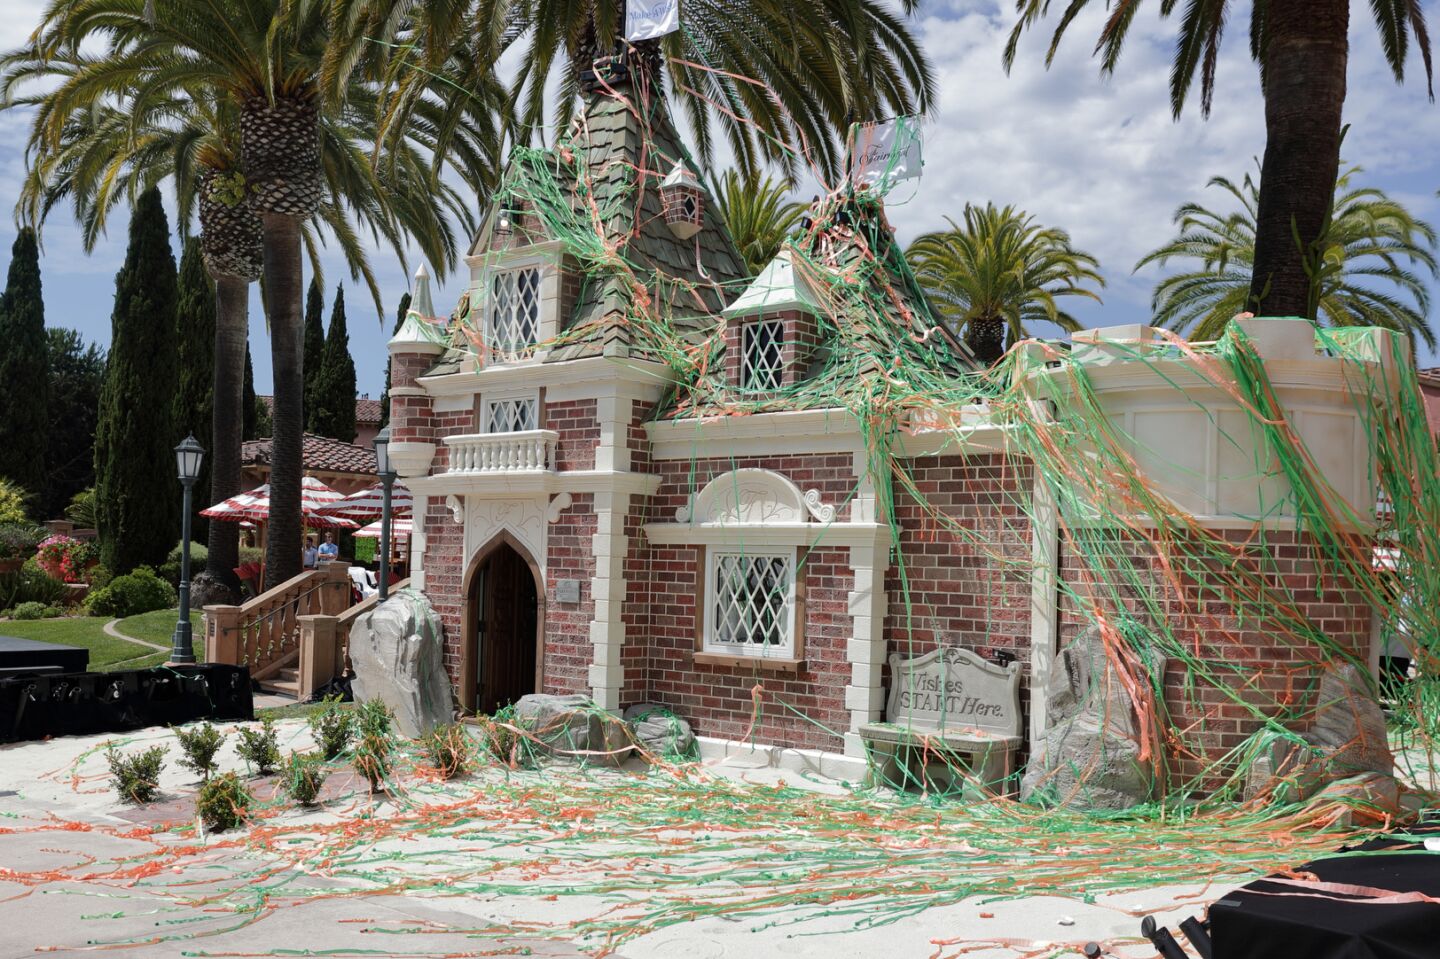 "Enchantment" envelops the Ultimate Kid's Playhouse during its unveiling at the Fairmont Grand Del Mar